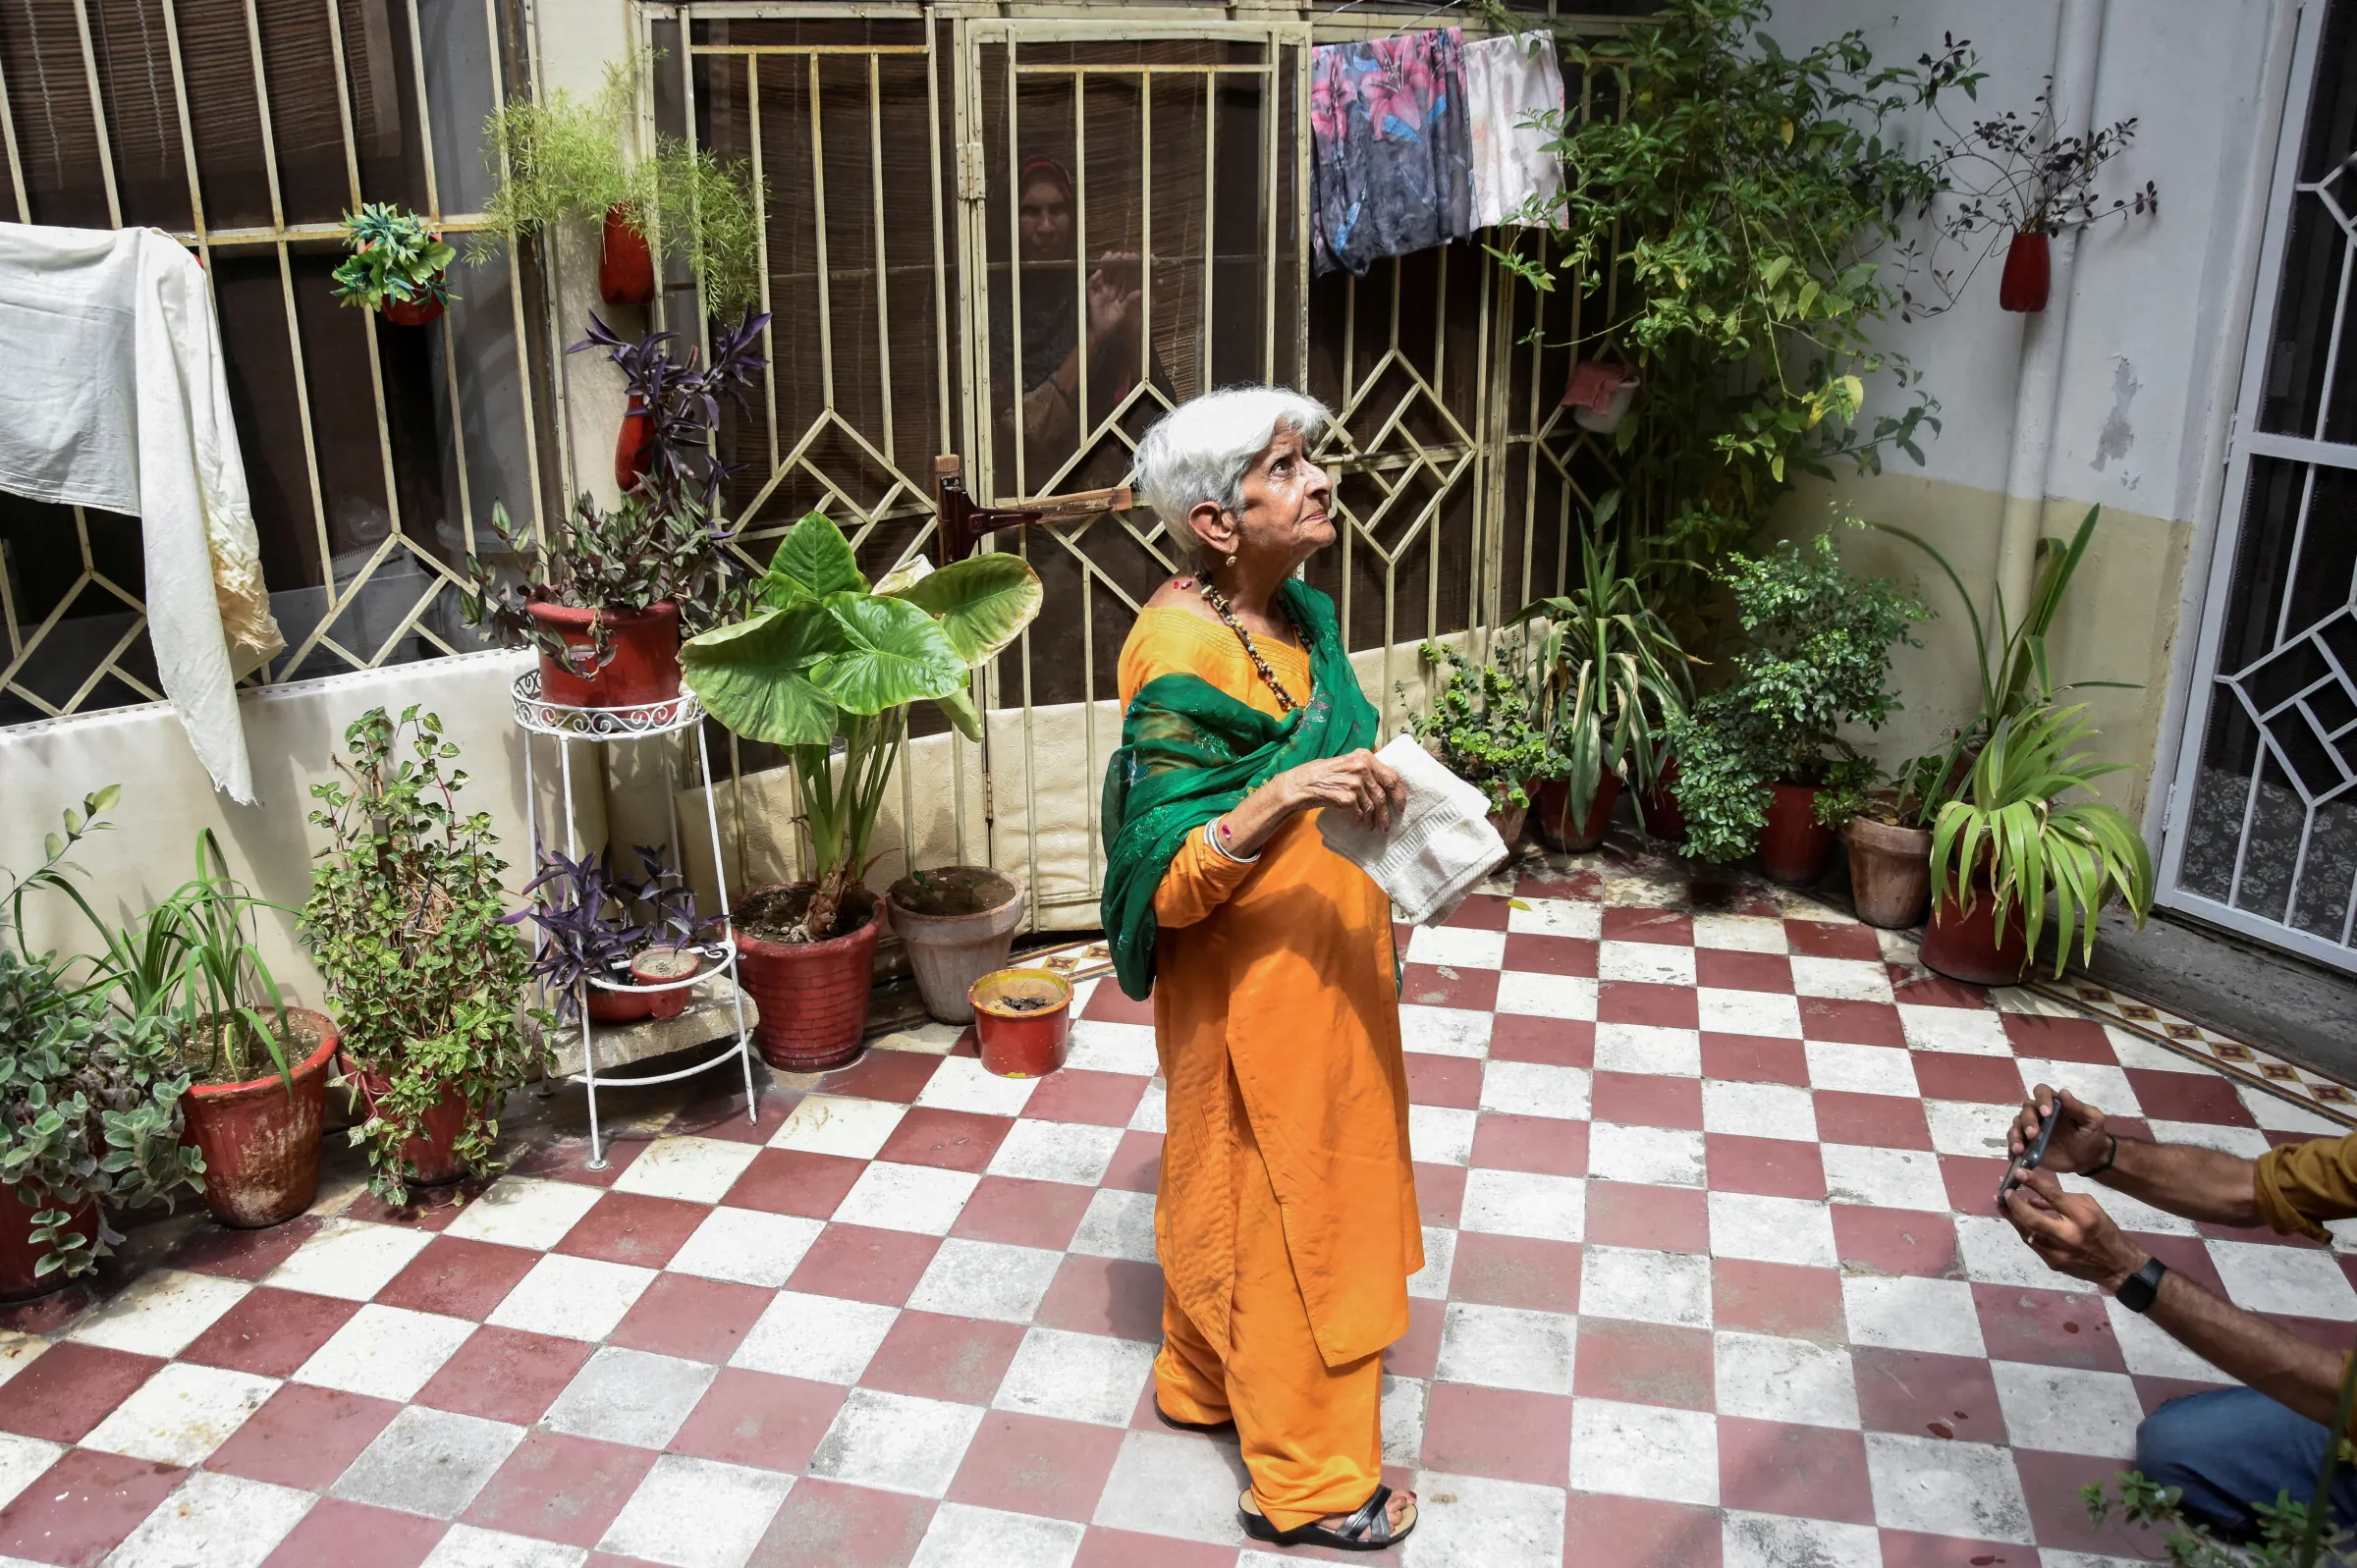 Reena Varma, 90-year-old Indian citizen born in Pakistan, stands at a neighbour's house next to her ancestral home